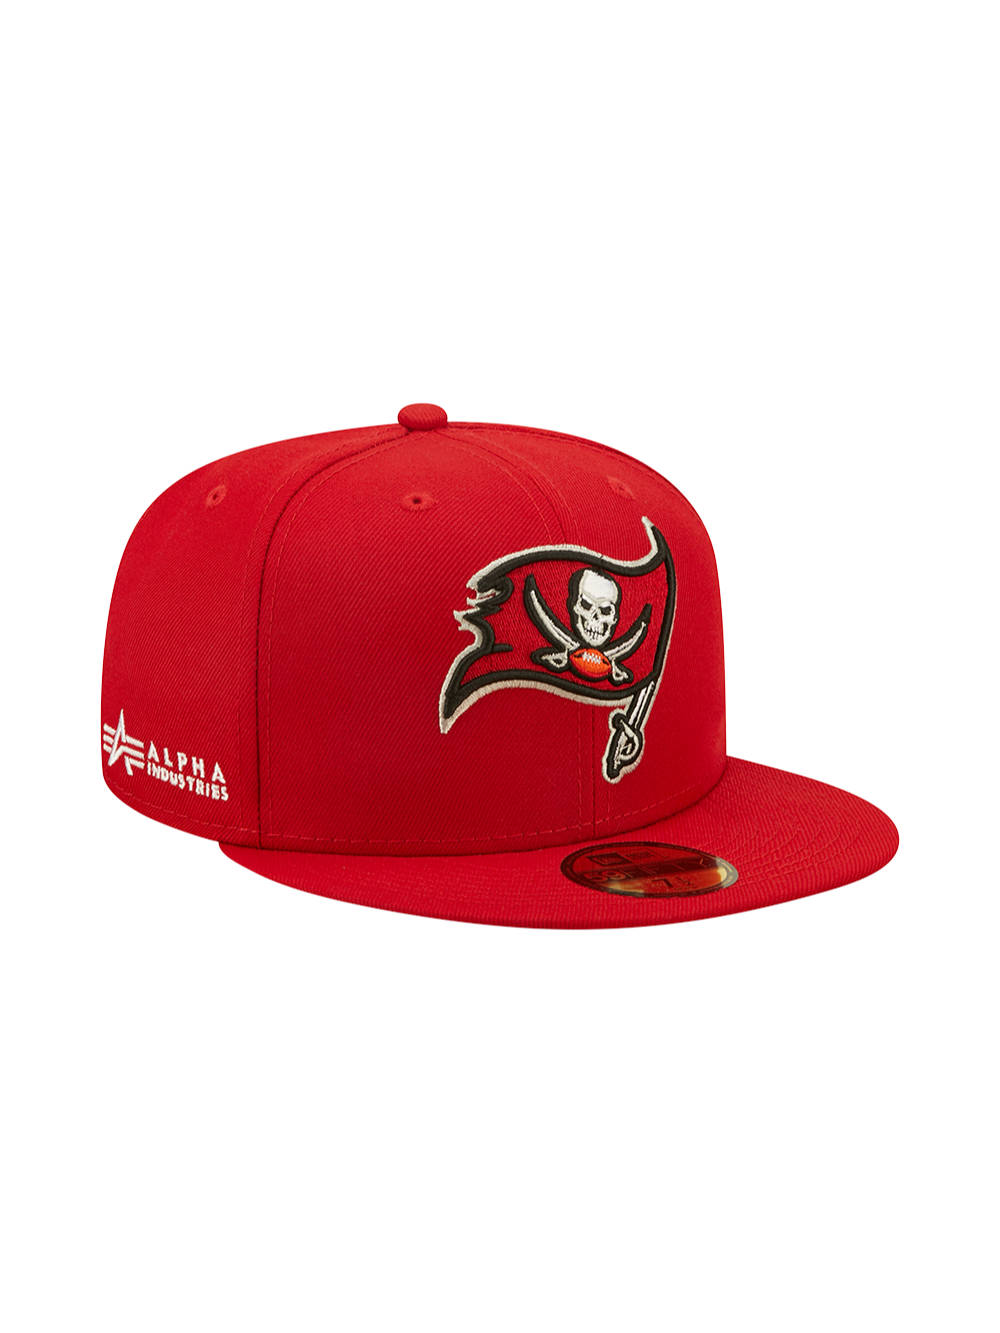 TAMPA BAY BUCCANEERS X ALPHA X NEW ERA 59FIFTY FITTED CAP ACCESSORY Alpha Industries 